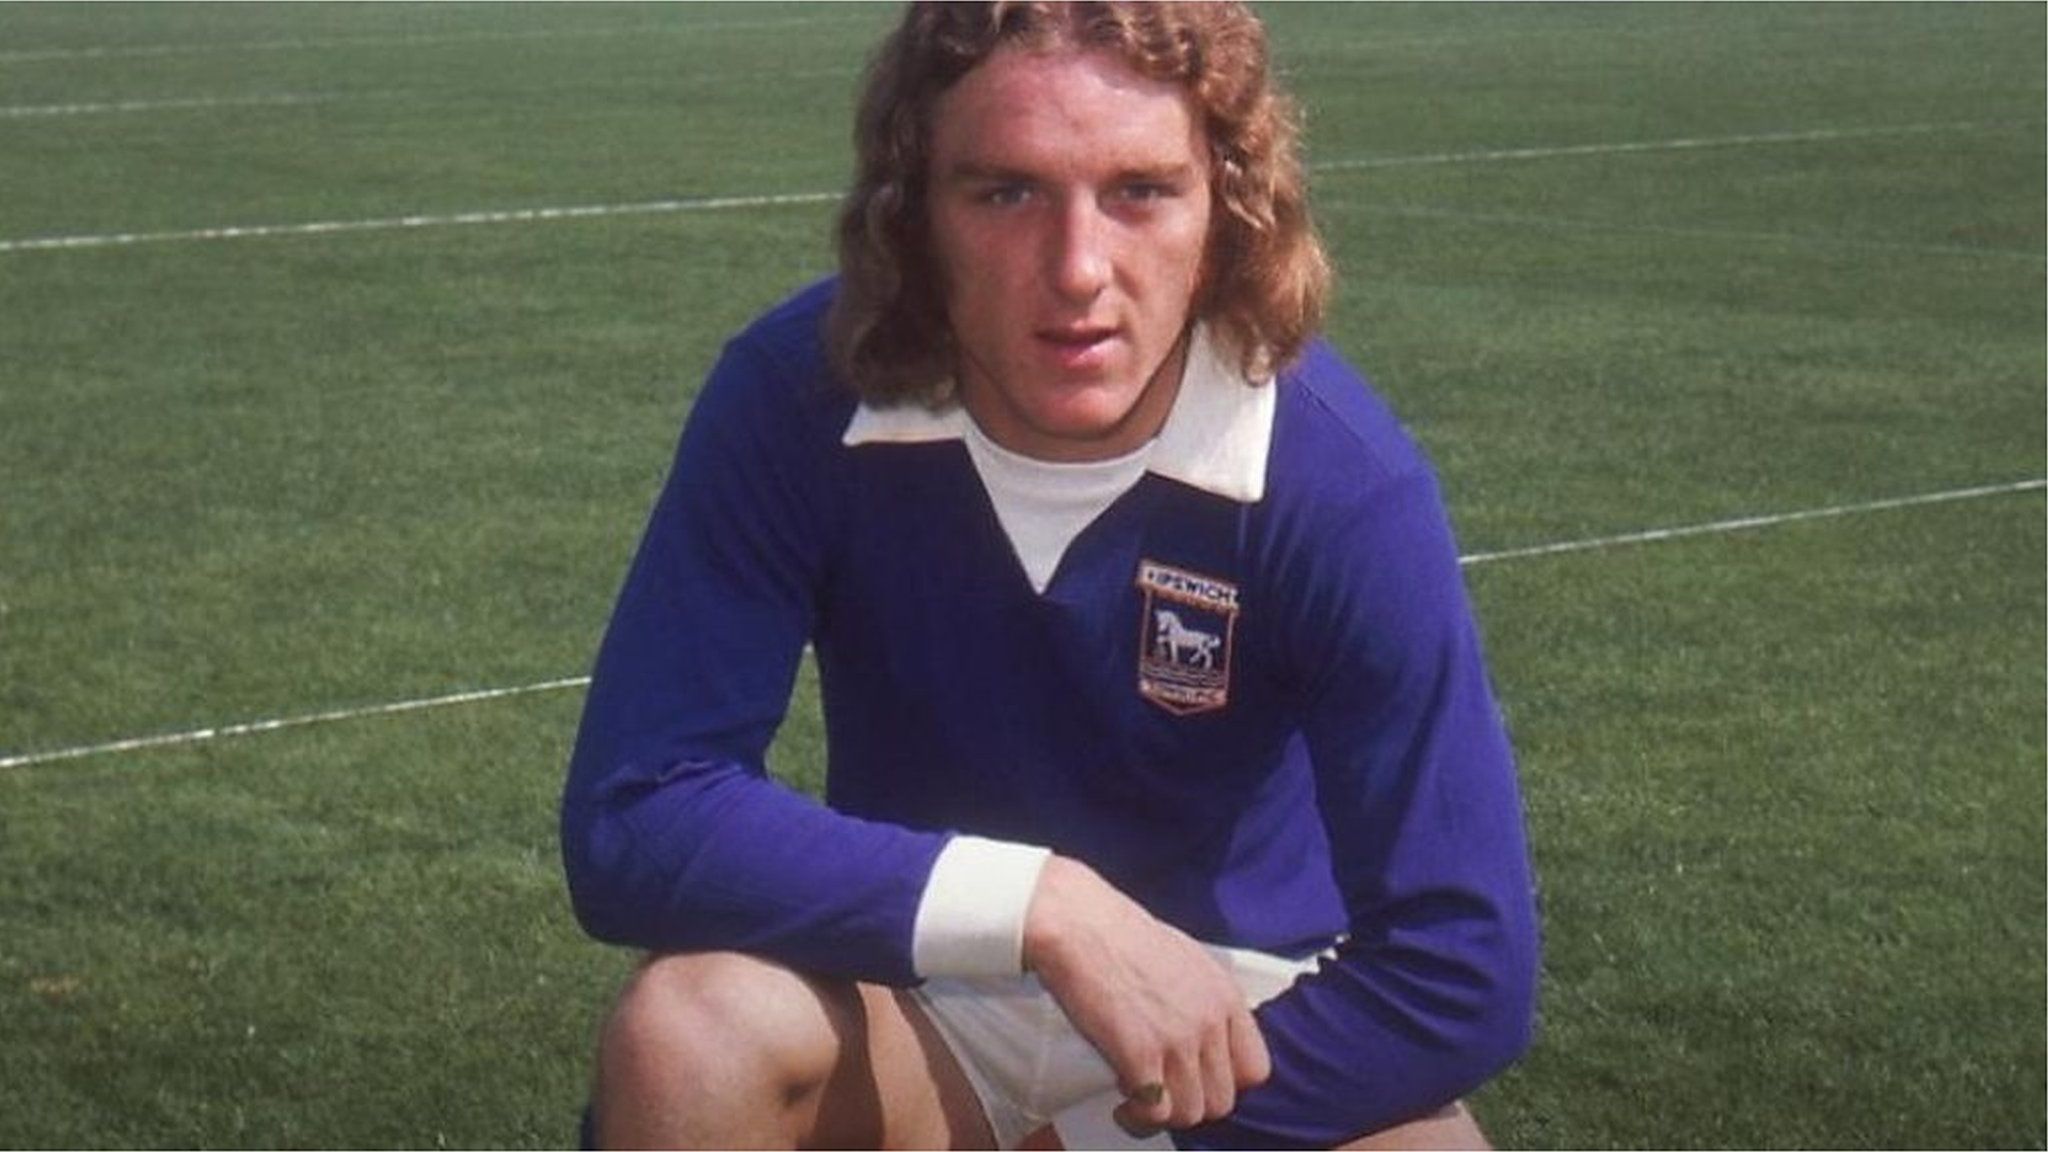 Kevin Bettie, who played for Ipswich Town and England, died aged 64 in September.